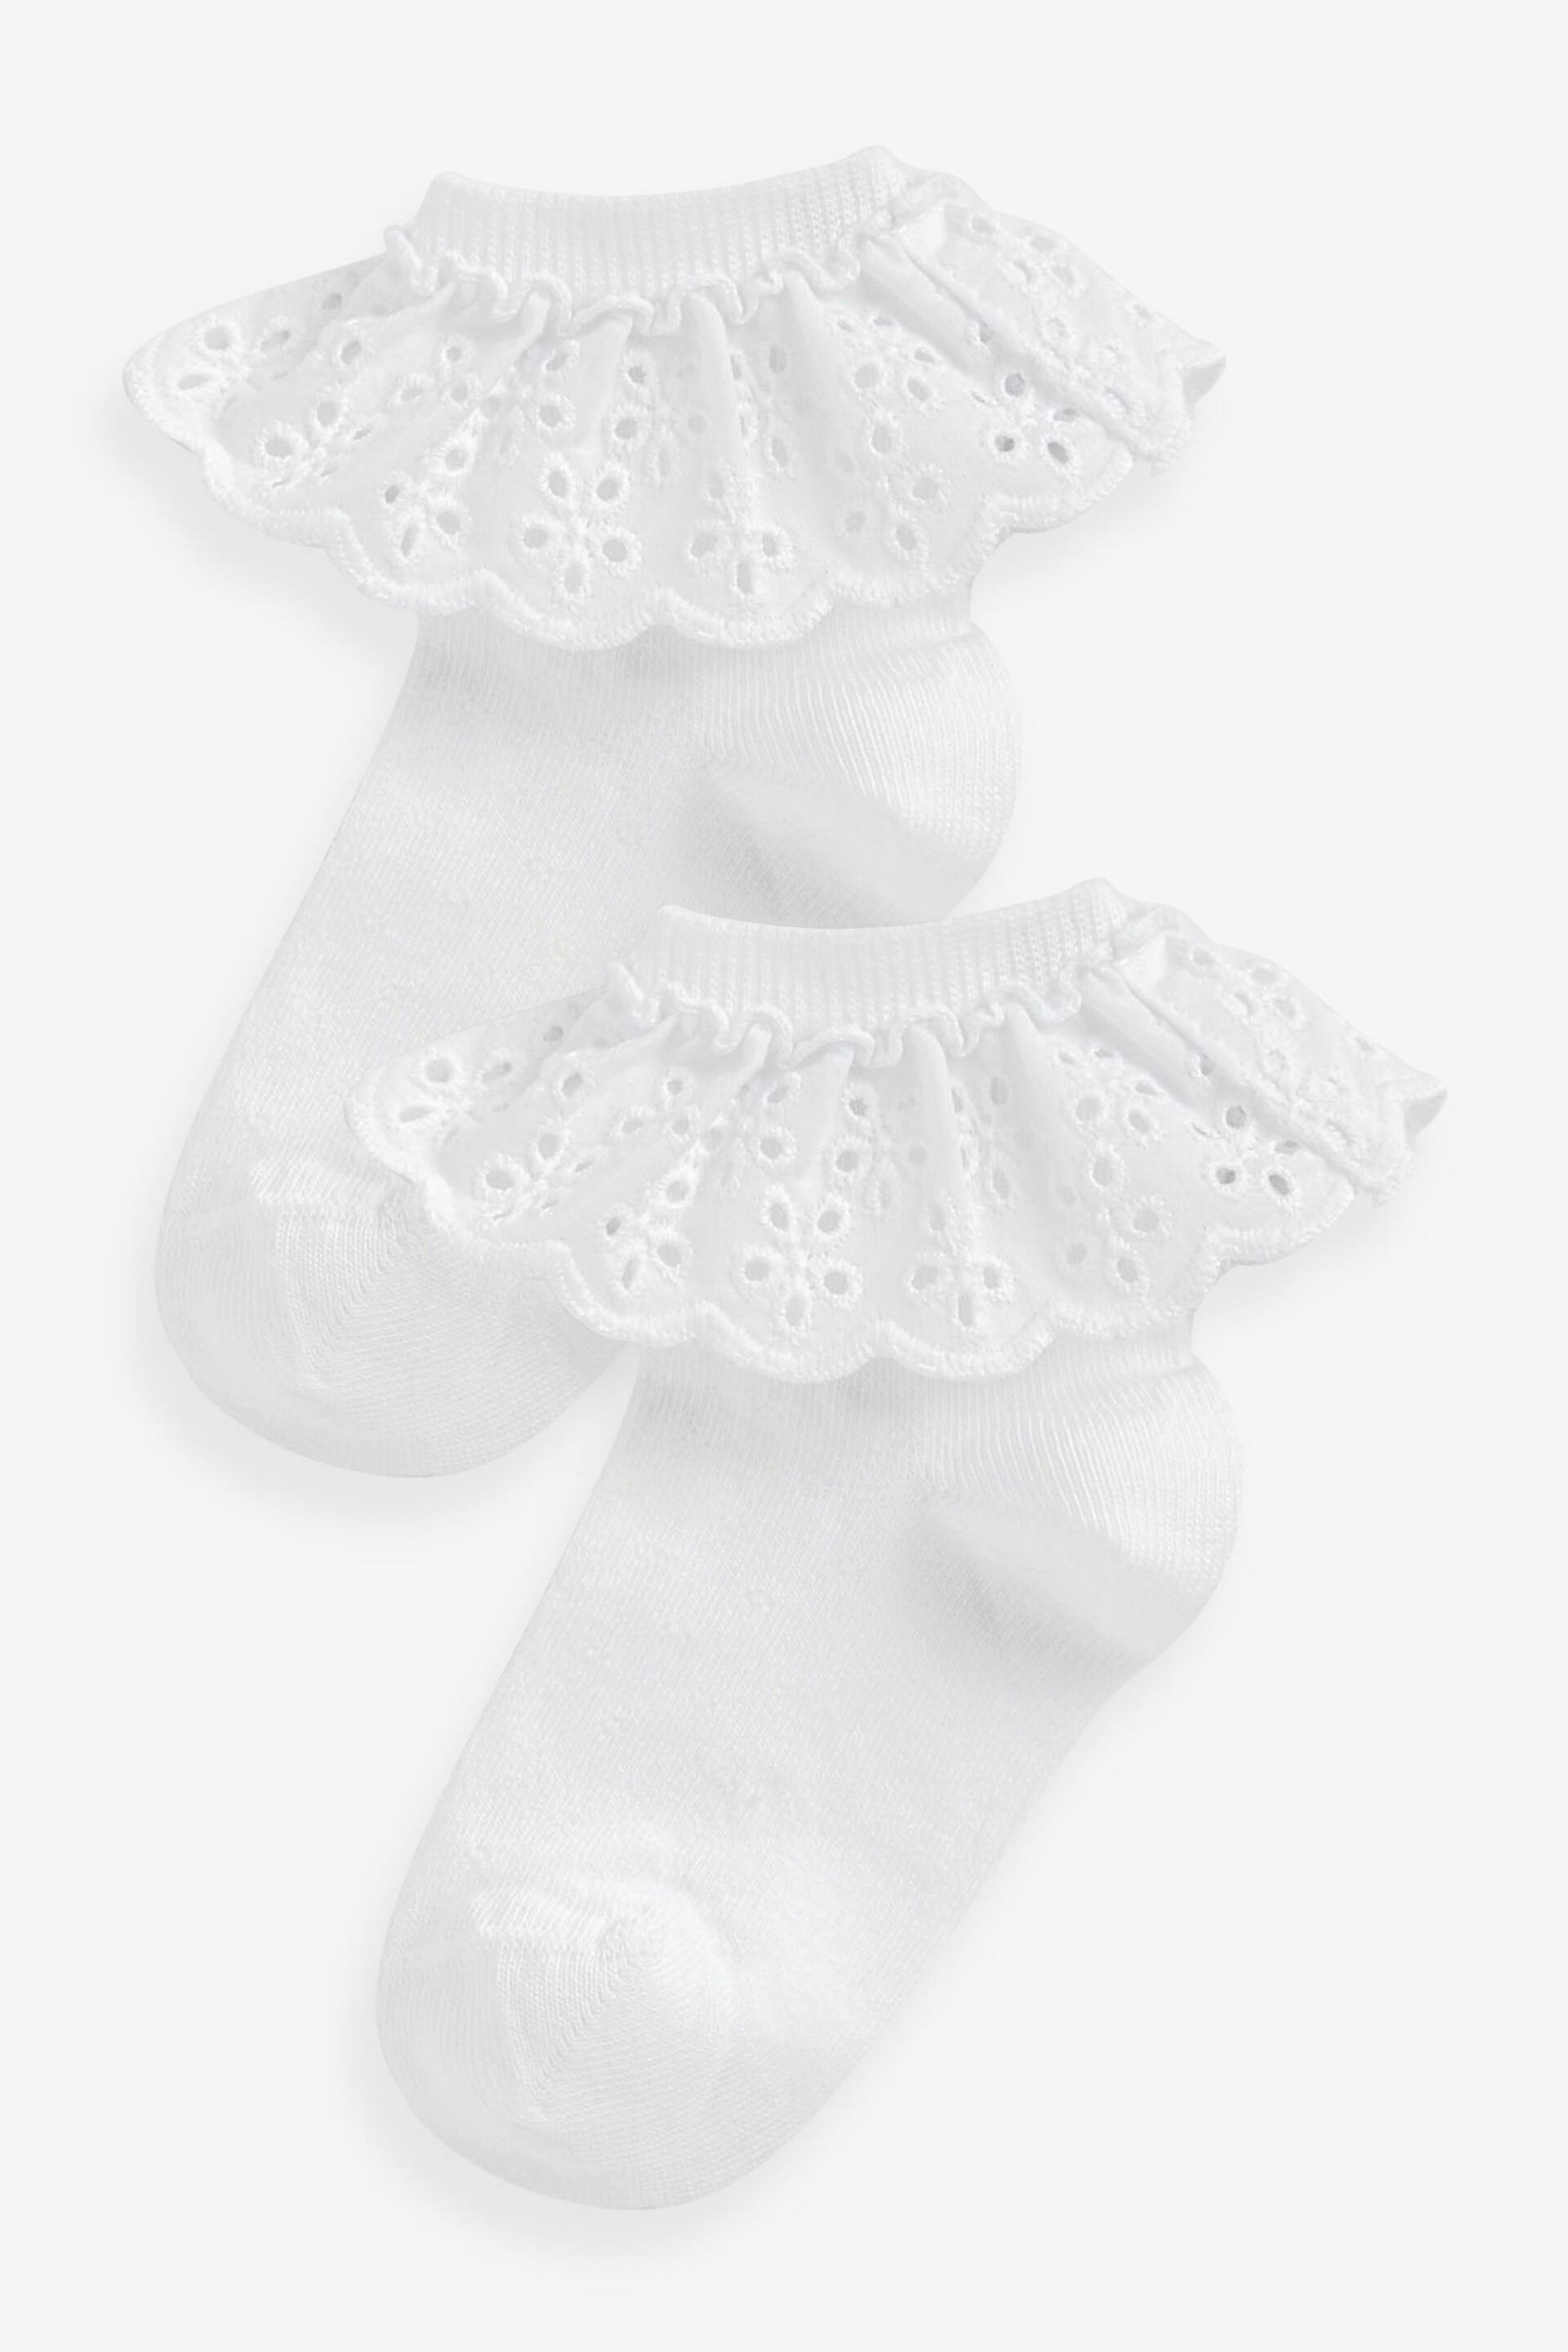 White Cotton Rich Ruffle Ankle Socks 2 Pack - Image 1 of 2